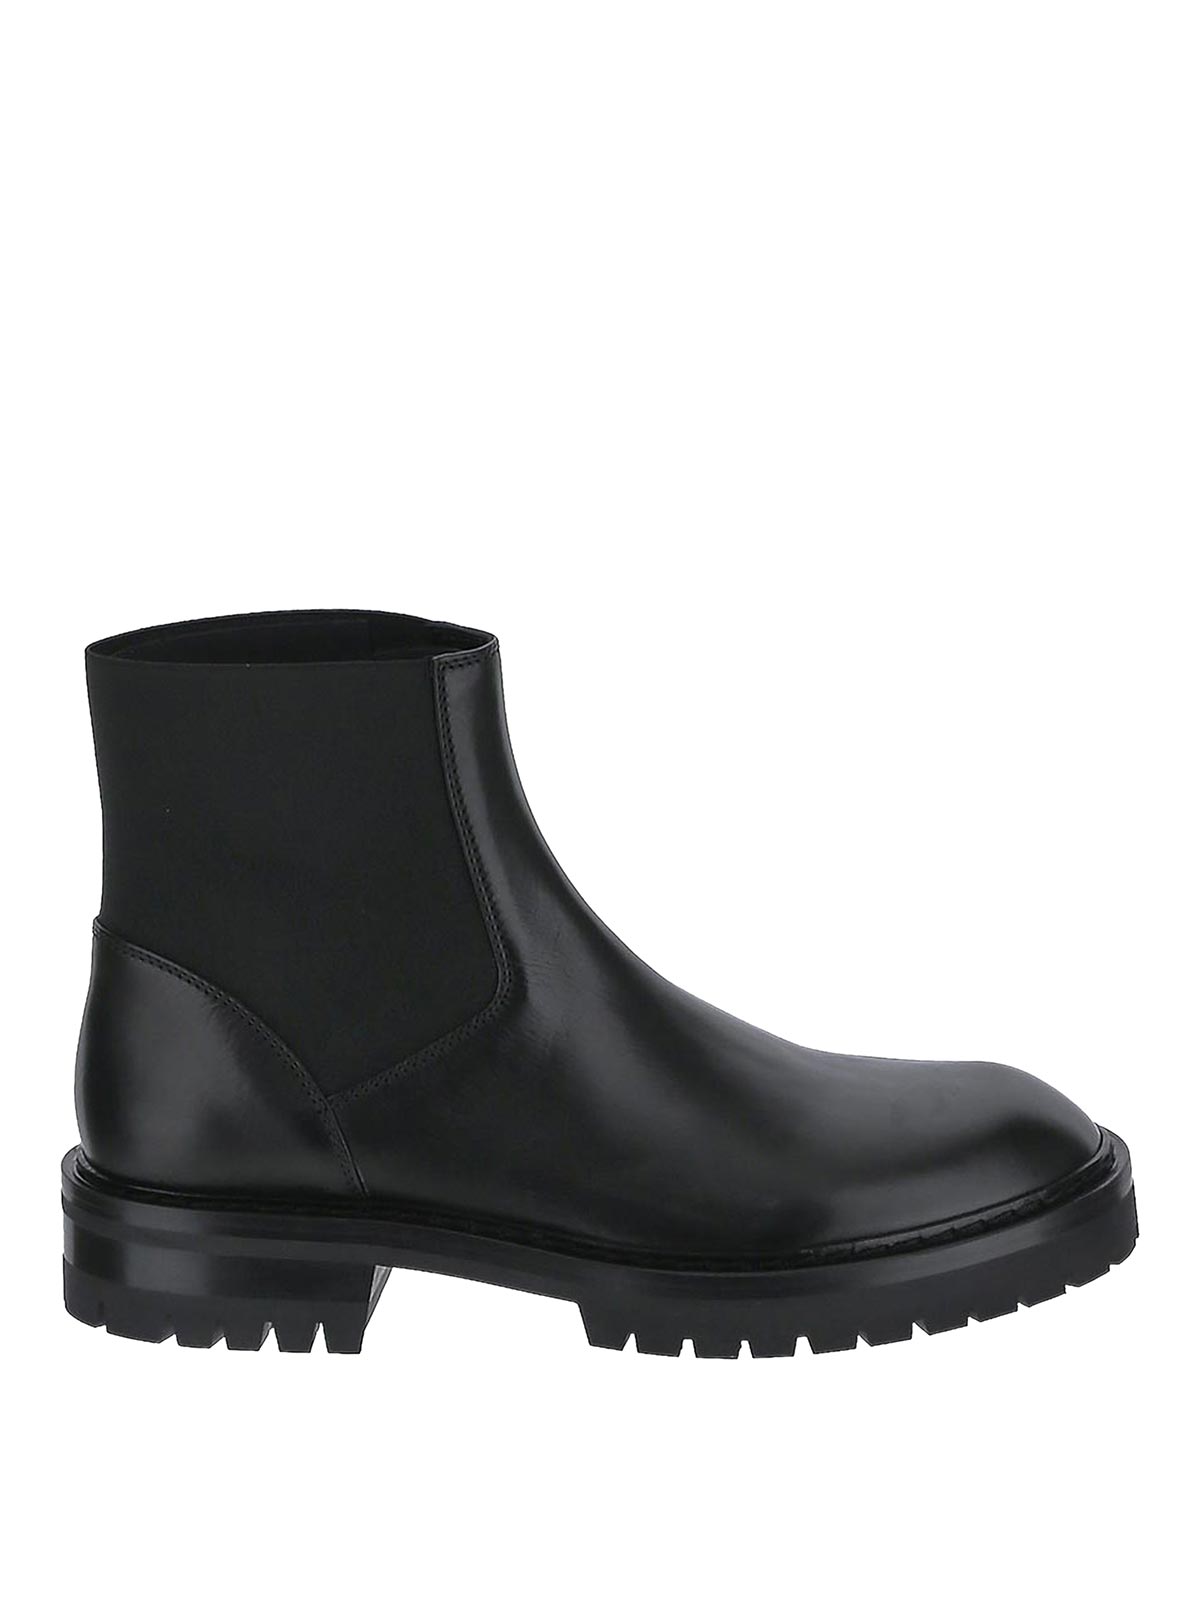 Ann Demeulemeester Santiago Boots In Black With Elastic Band